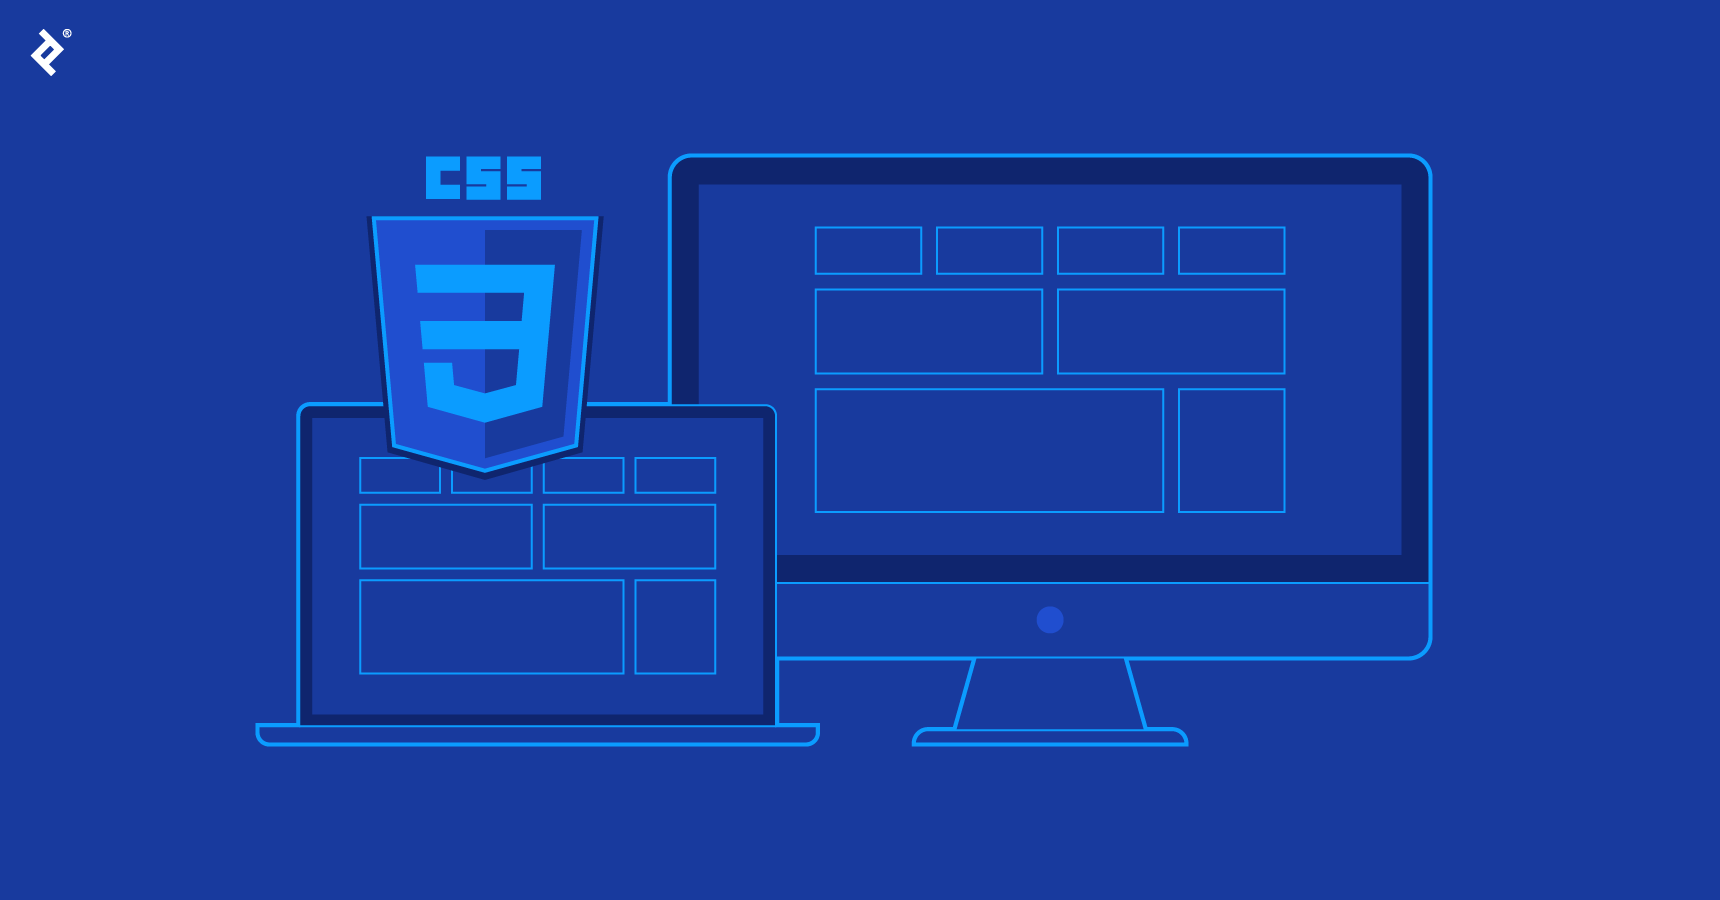 CSS Layout Tutorial: From Classic Approaches to the Latest Techniques